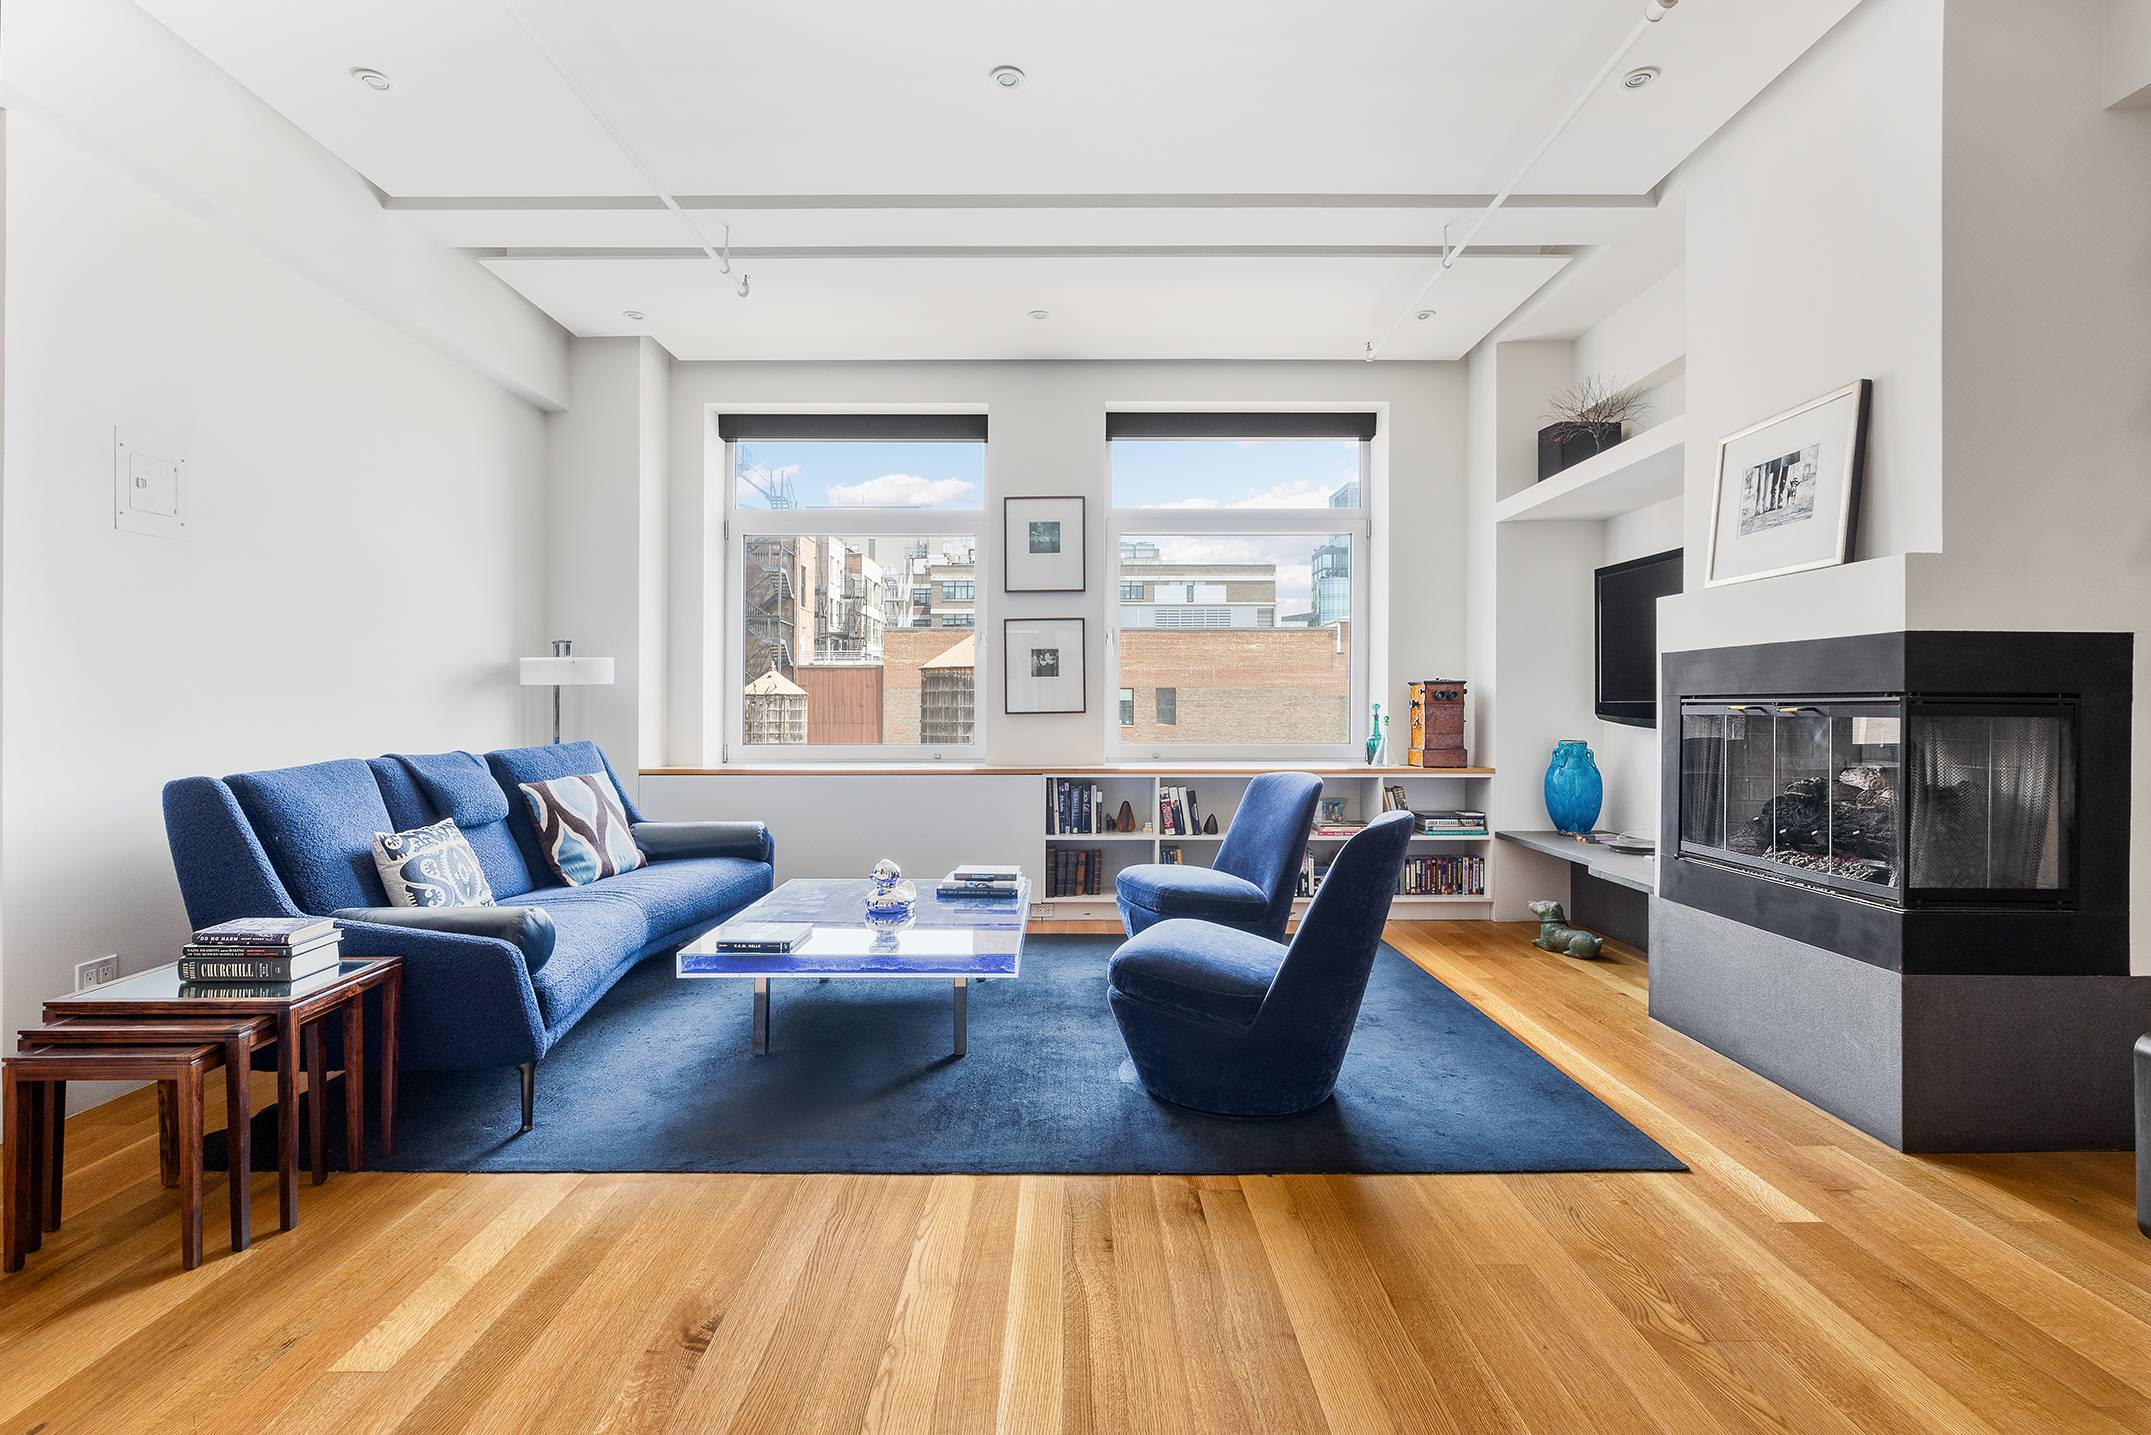 This dreamy renovated NOHO duplex on a high floor boasts outstanding light and views perched above where Greenwich Village, Noho, and Soho intersect.